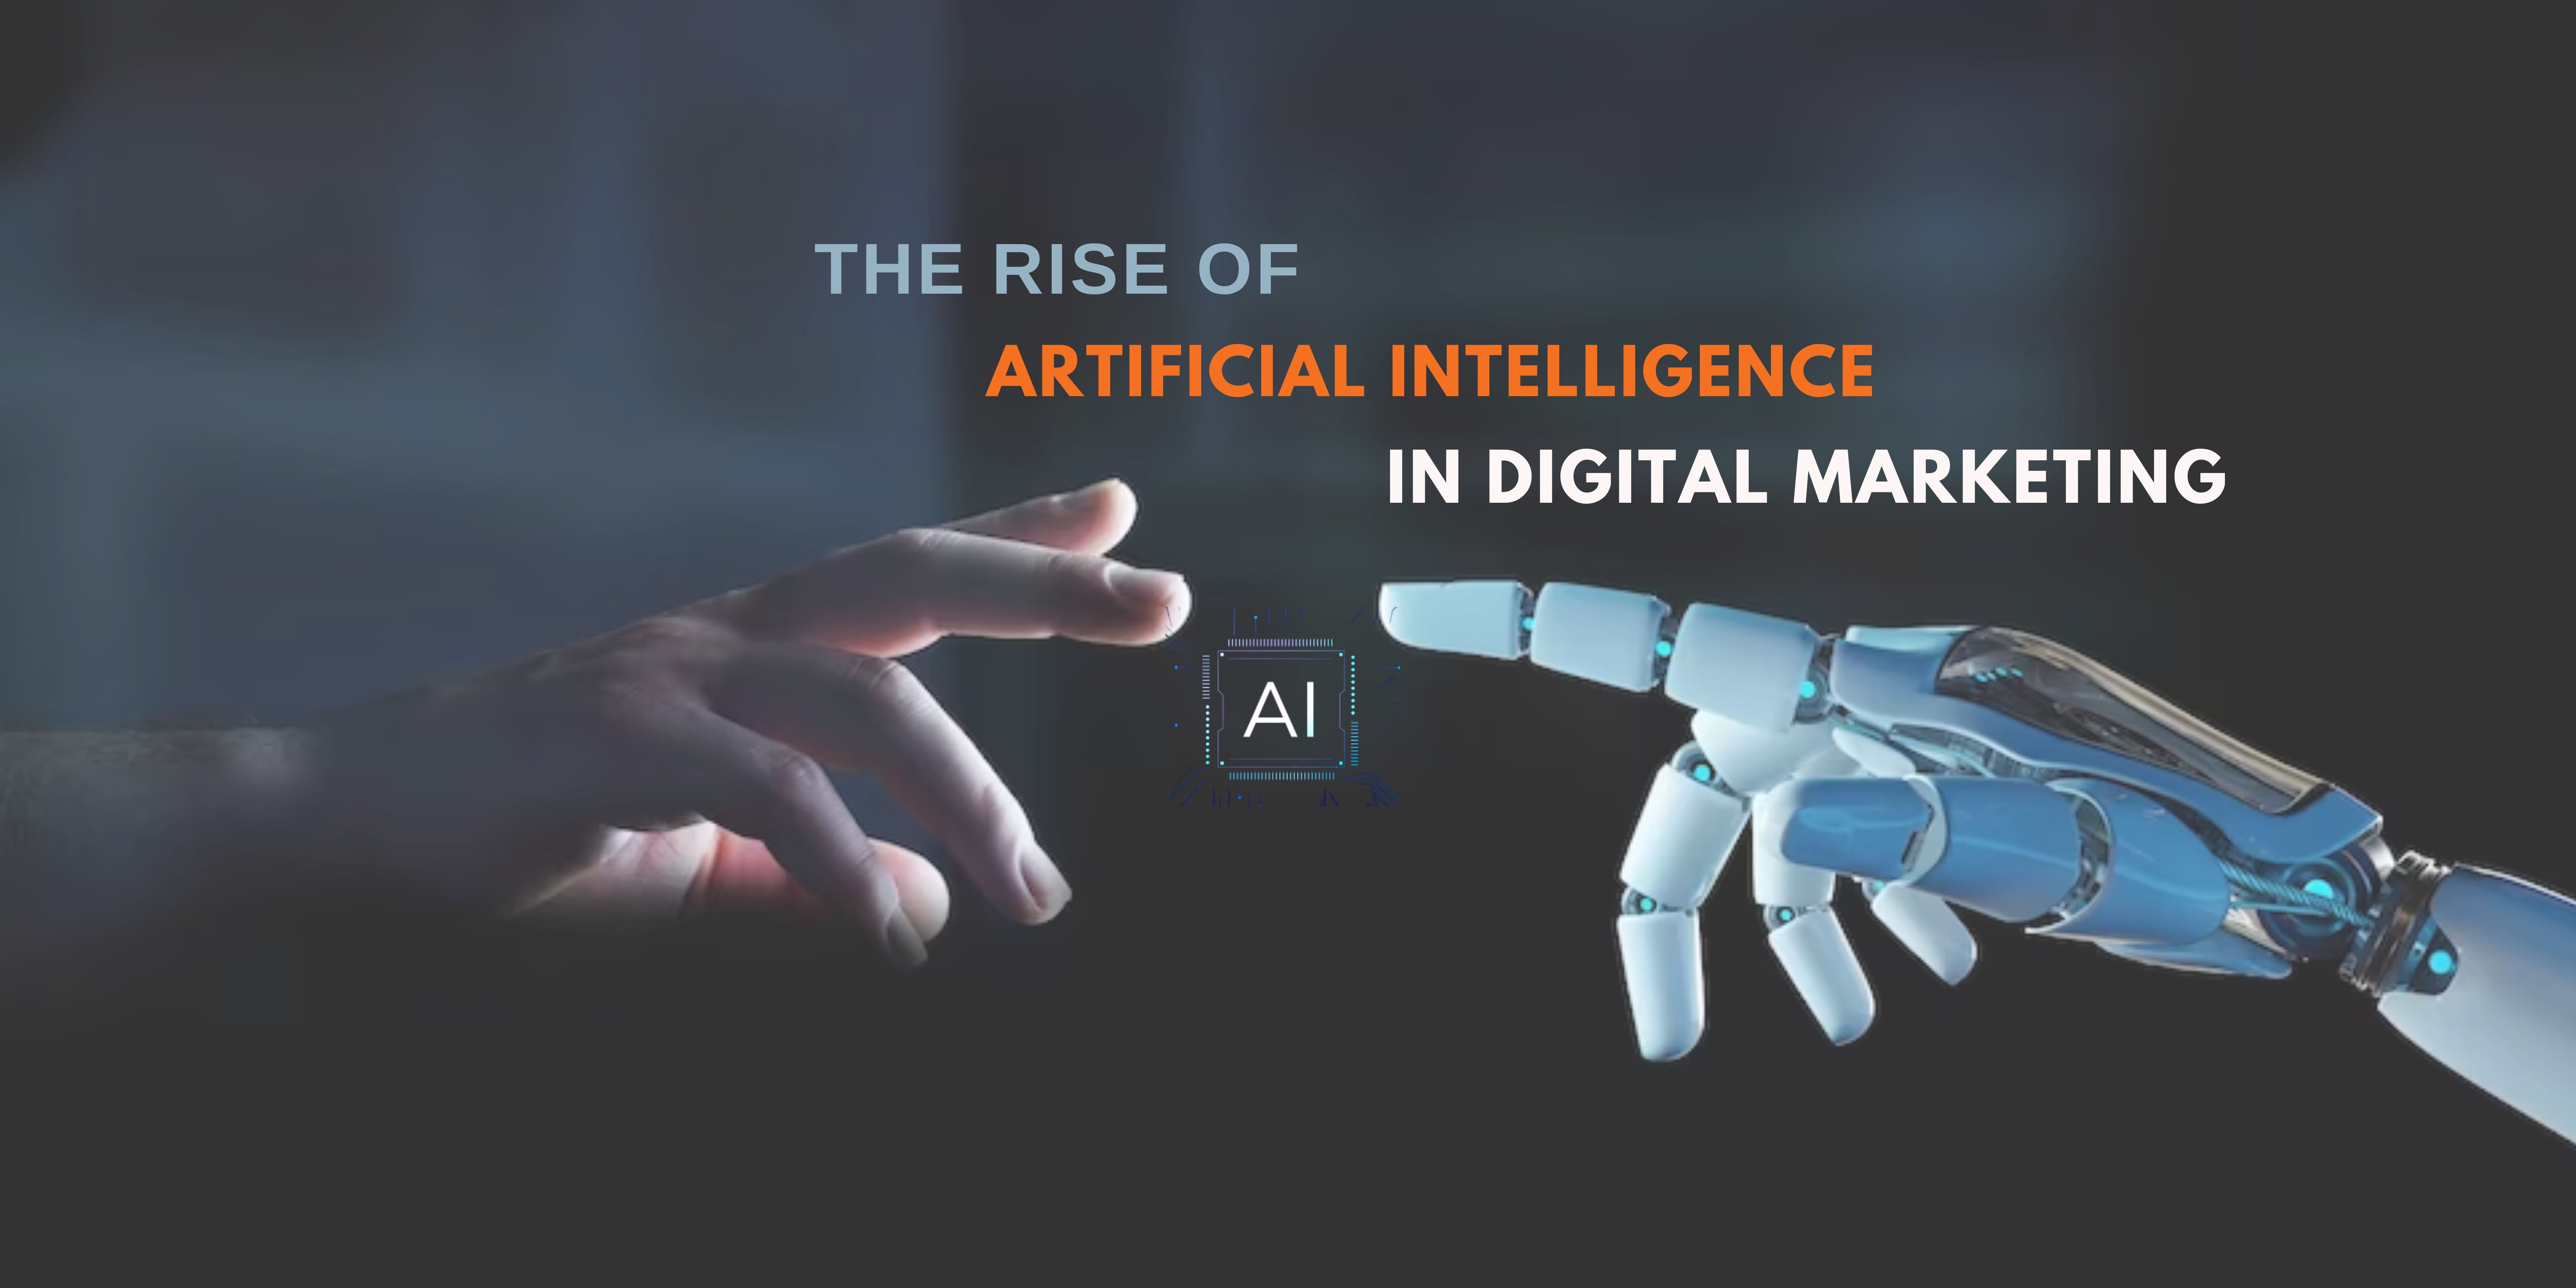 The Rise of Artificial Intelligence in Digital Marketing